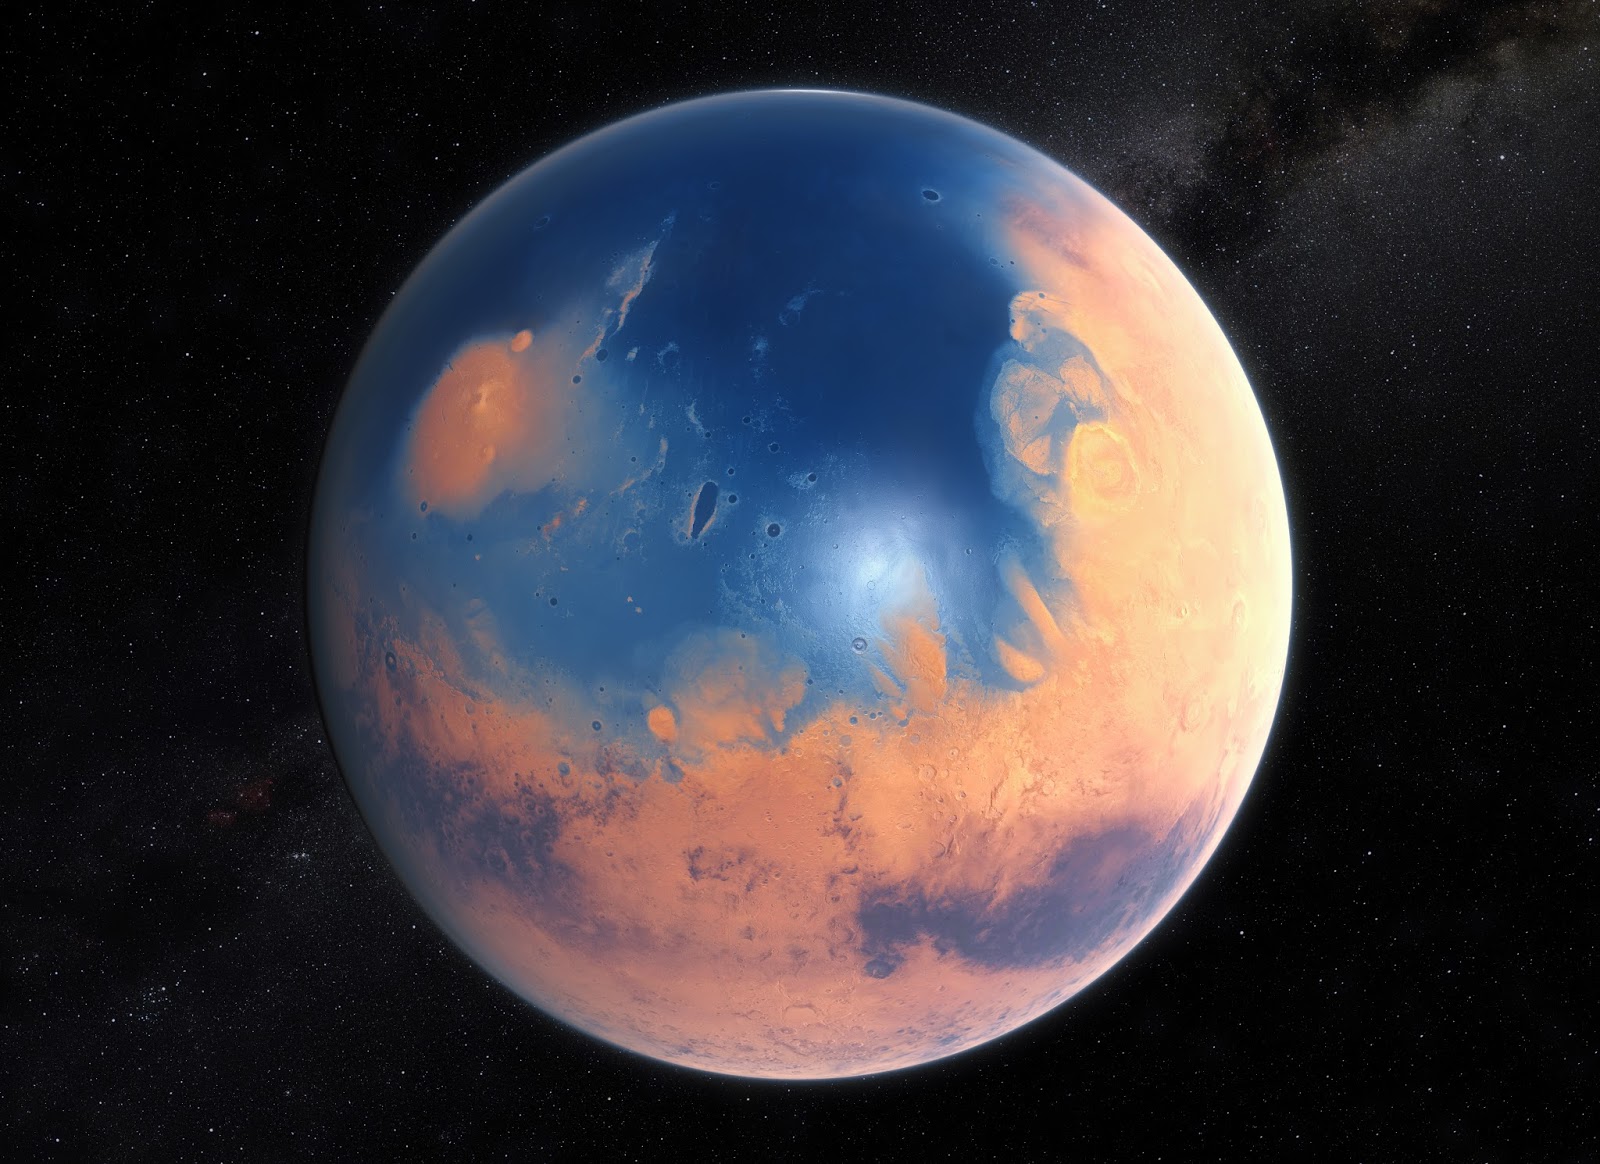 Mars four billion years ago - The Planet that Lost an Ocean’s Worth of Water